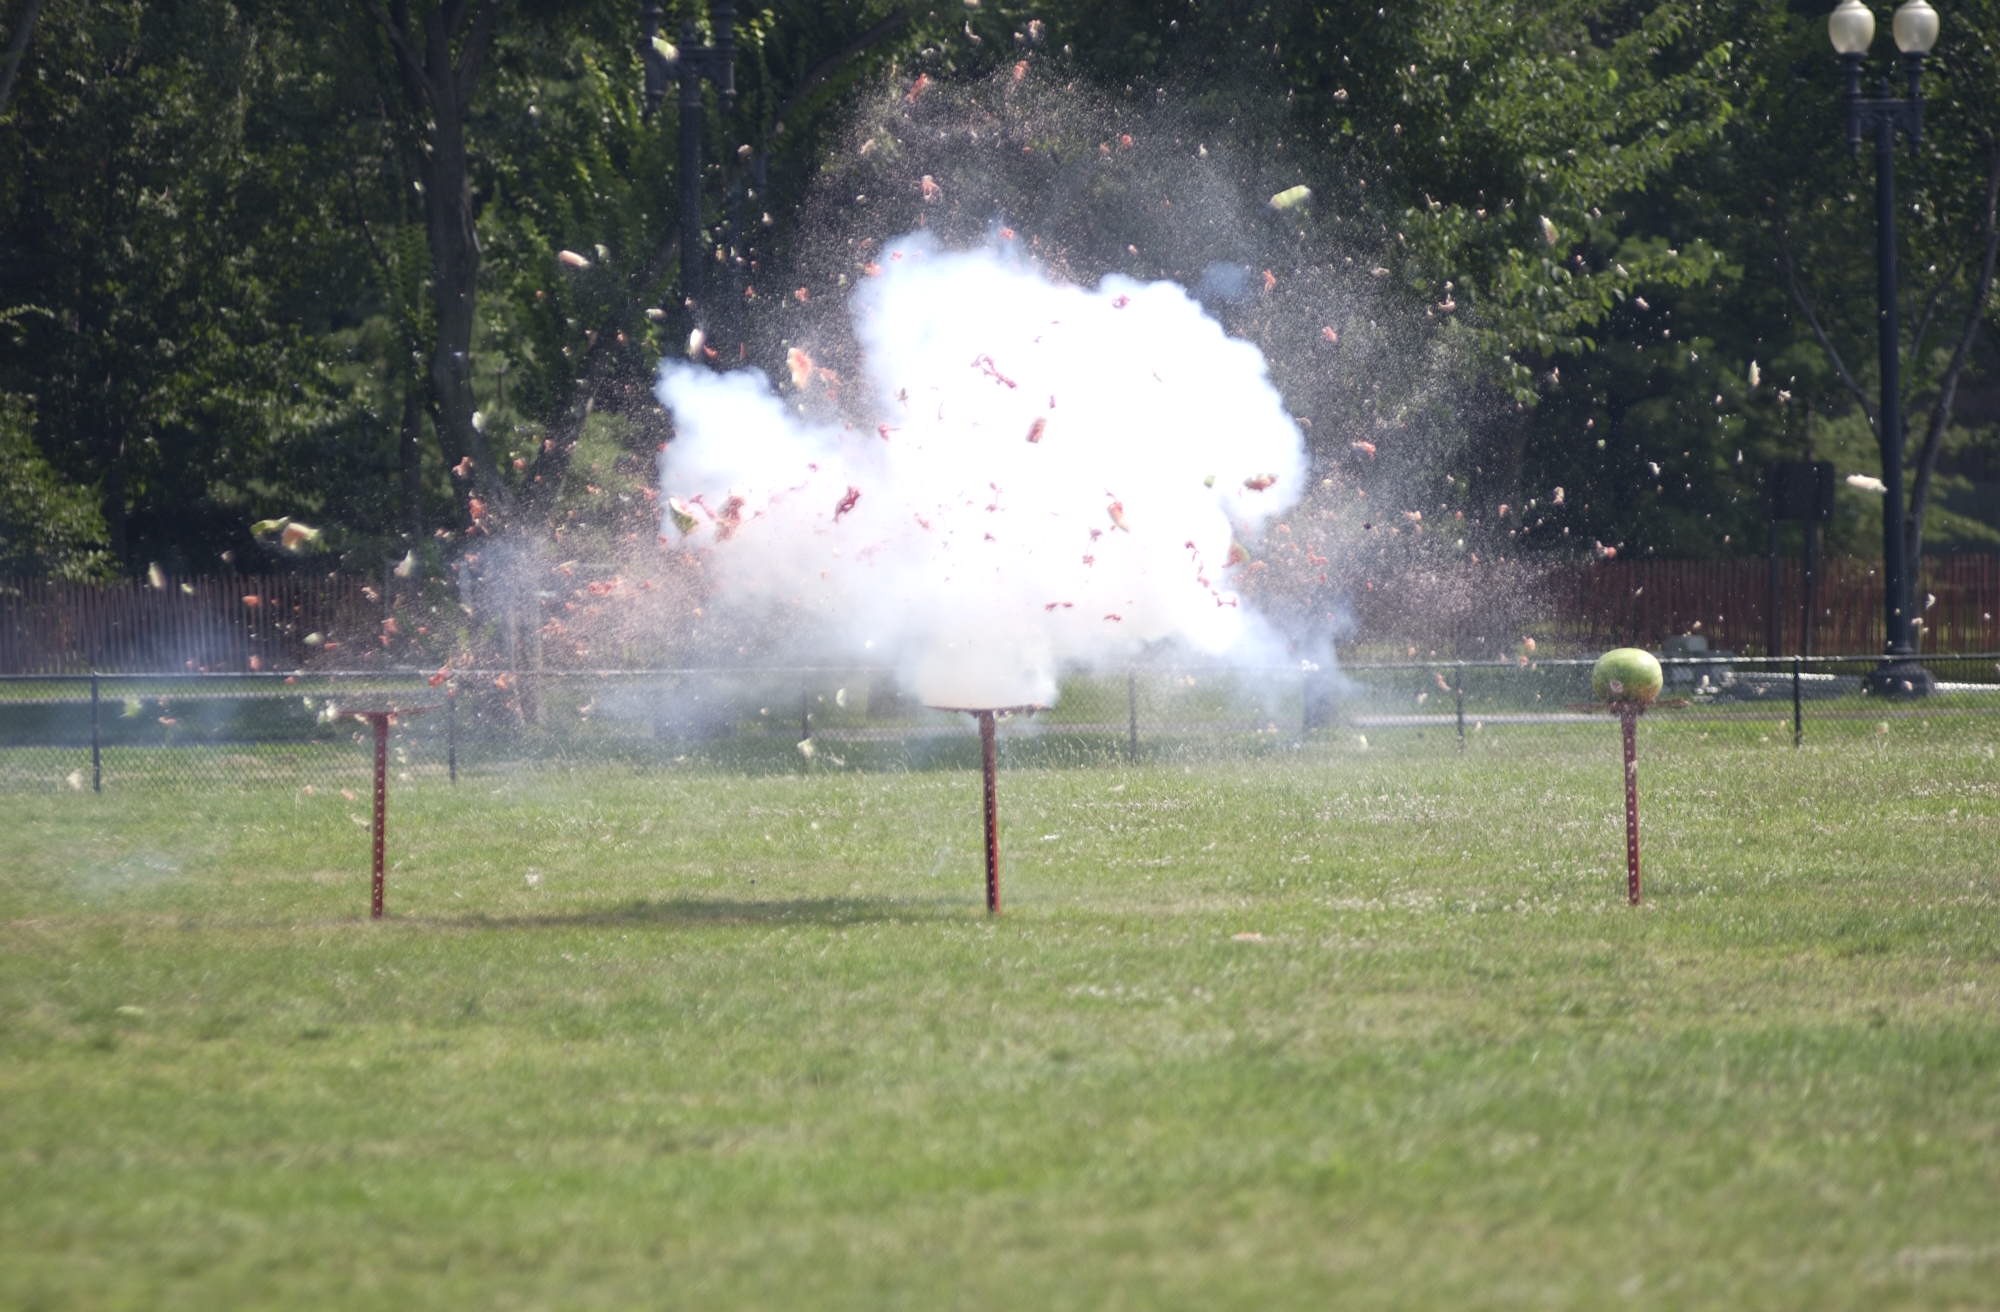 The explosive power of illegal fireworks is demonstrated in this picture